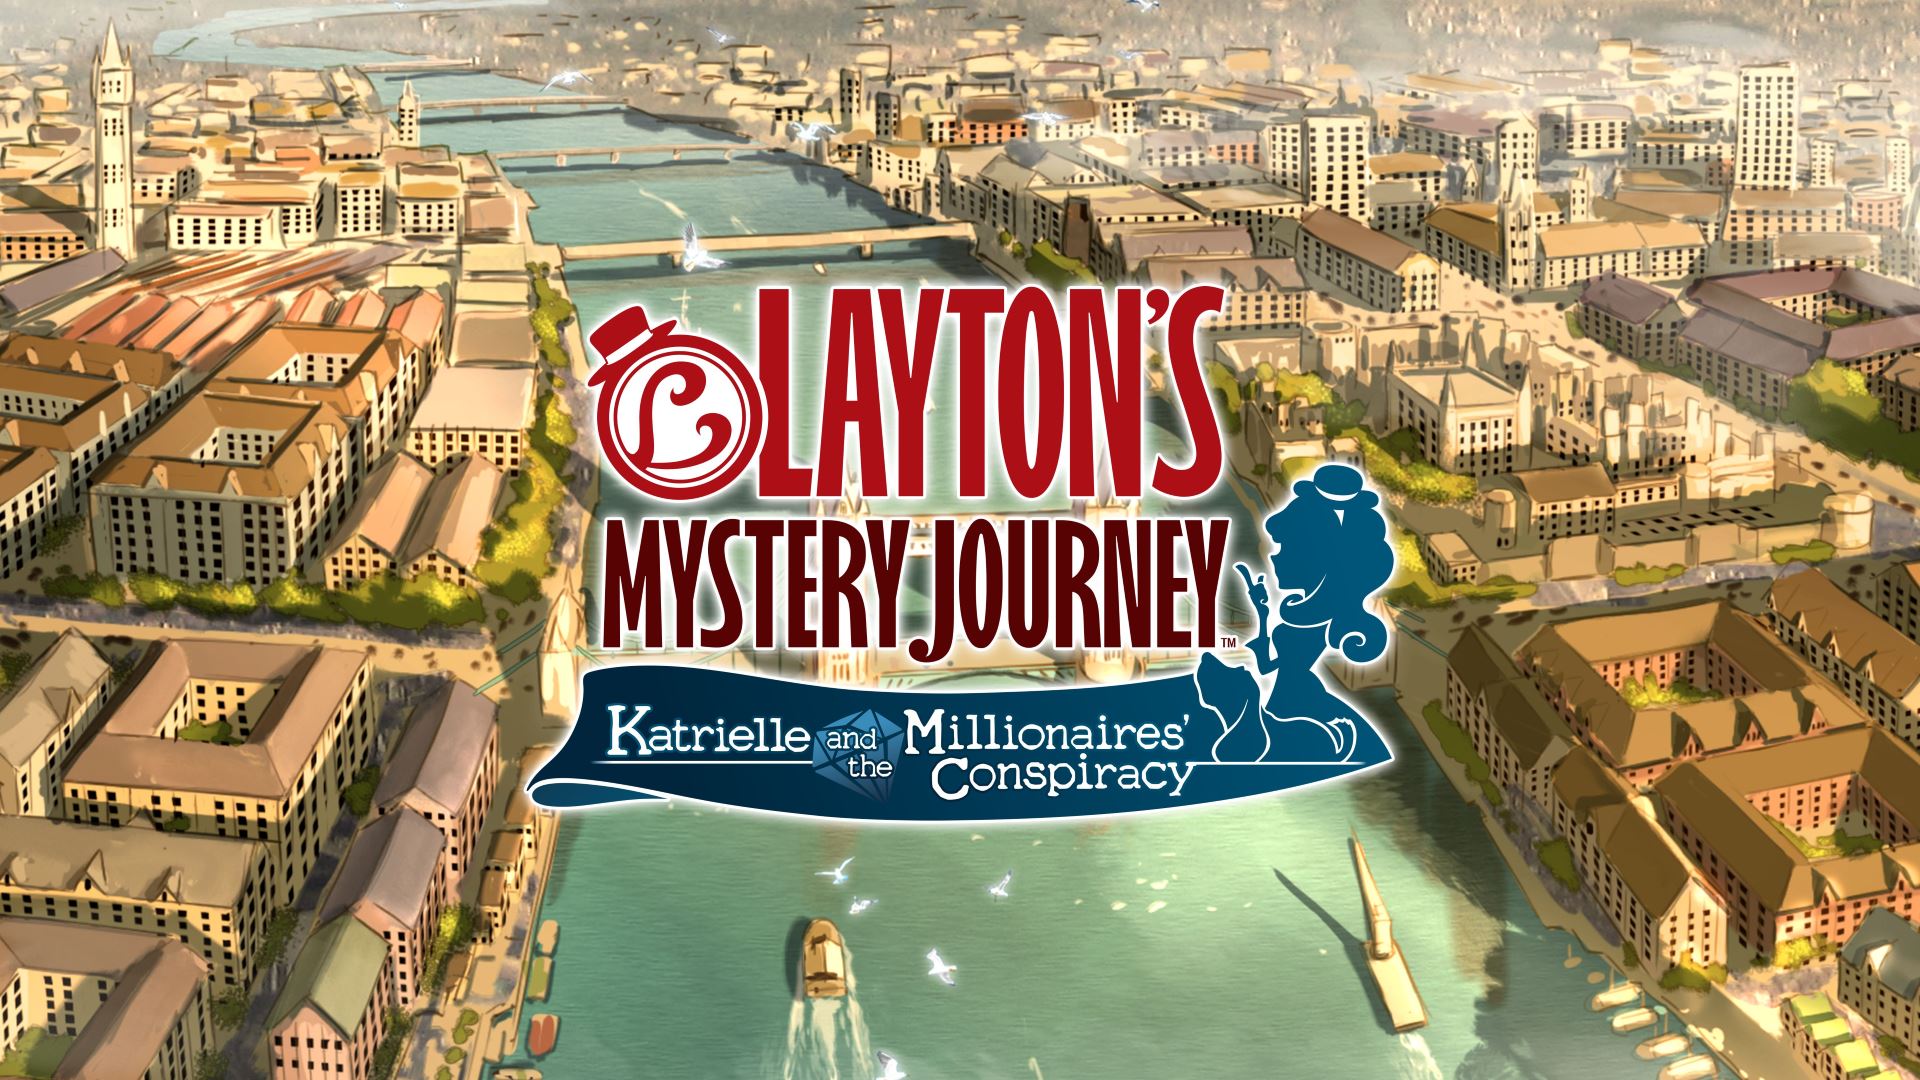 layton-s-mystery-journey-katrielle-and-the-millionaires-conspiracy-review-godisageek